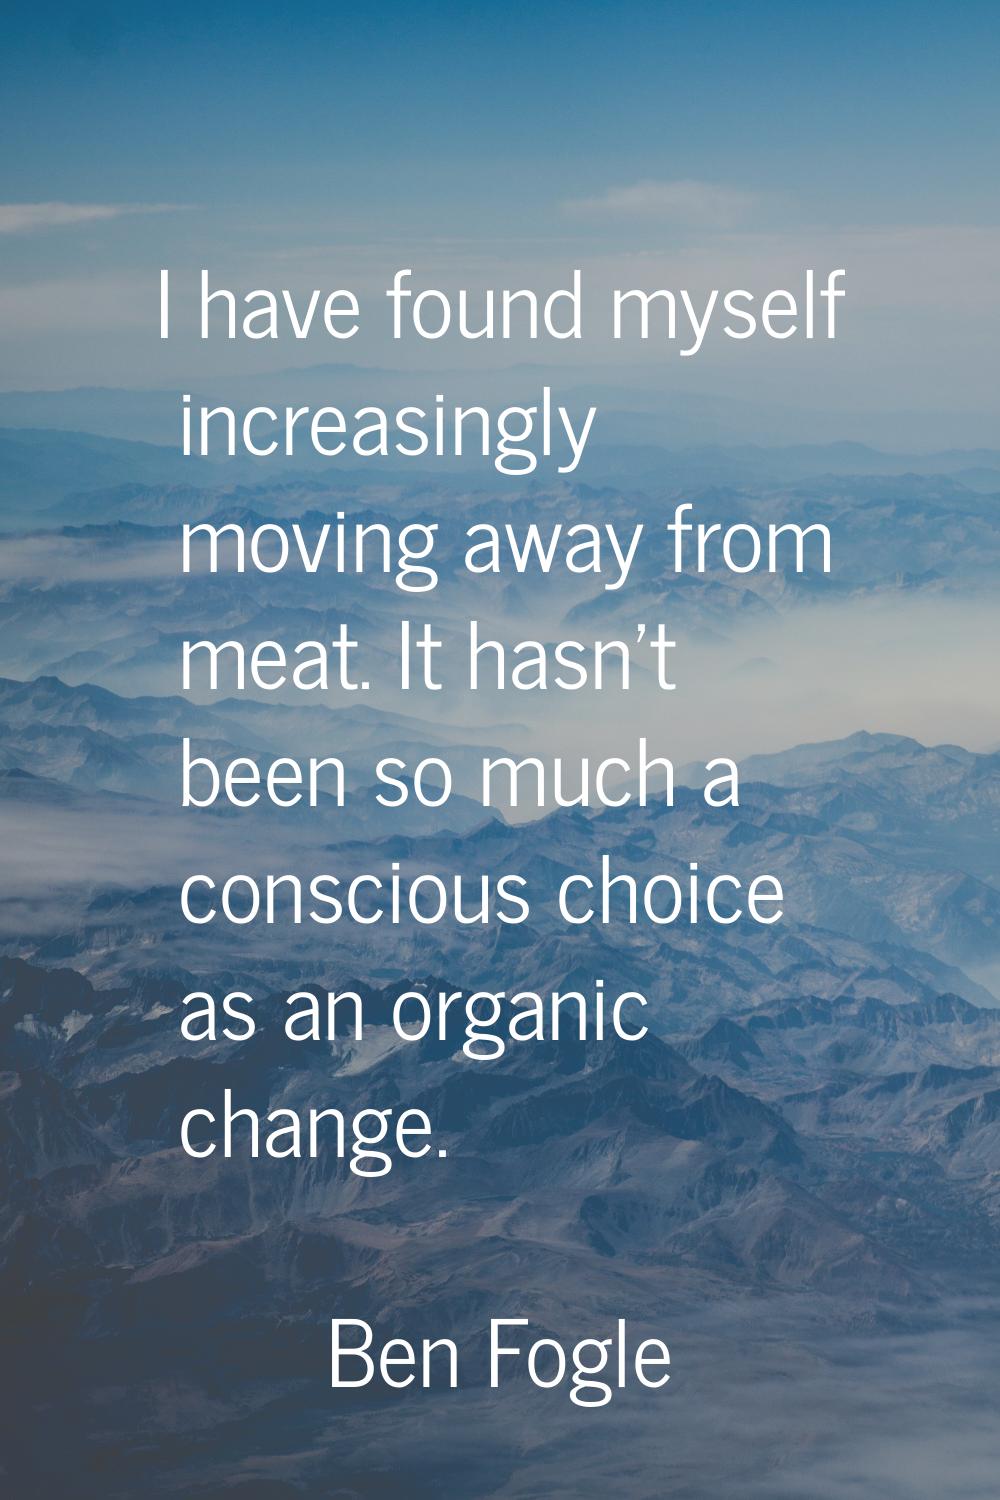 I have found myself increasingly moving away from meat. It hasn't been so much a conscious choice a